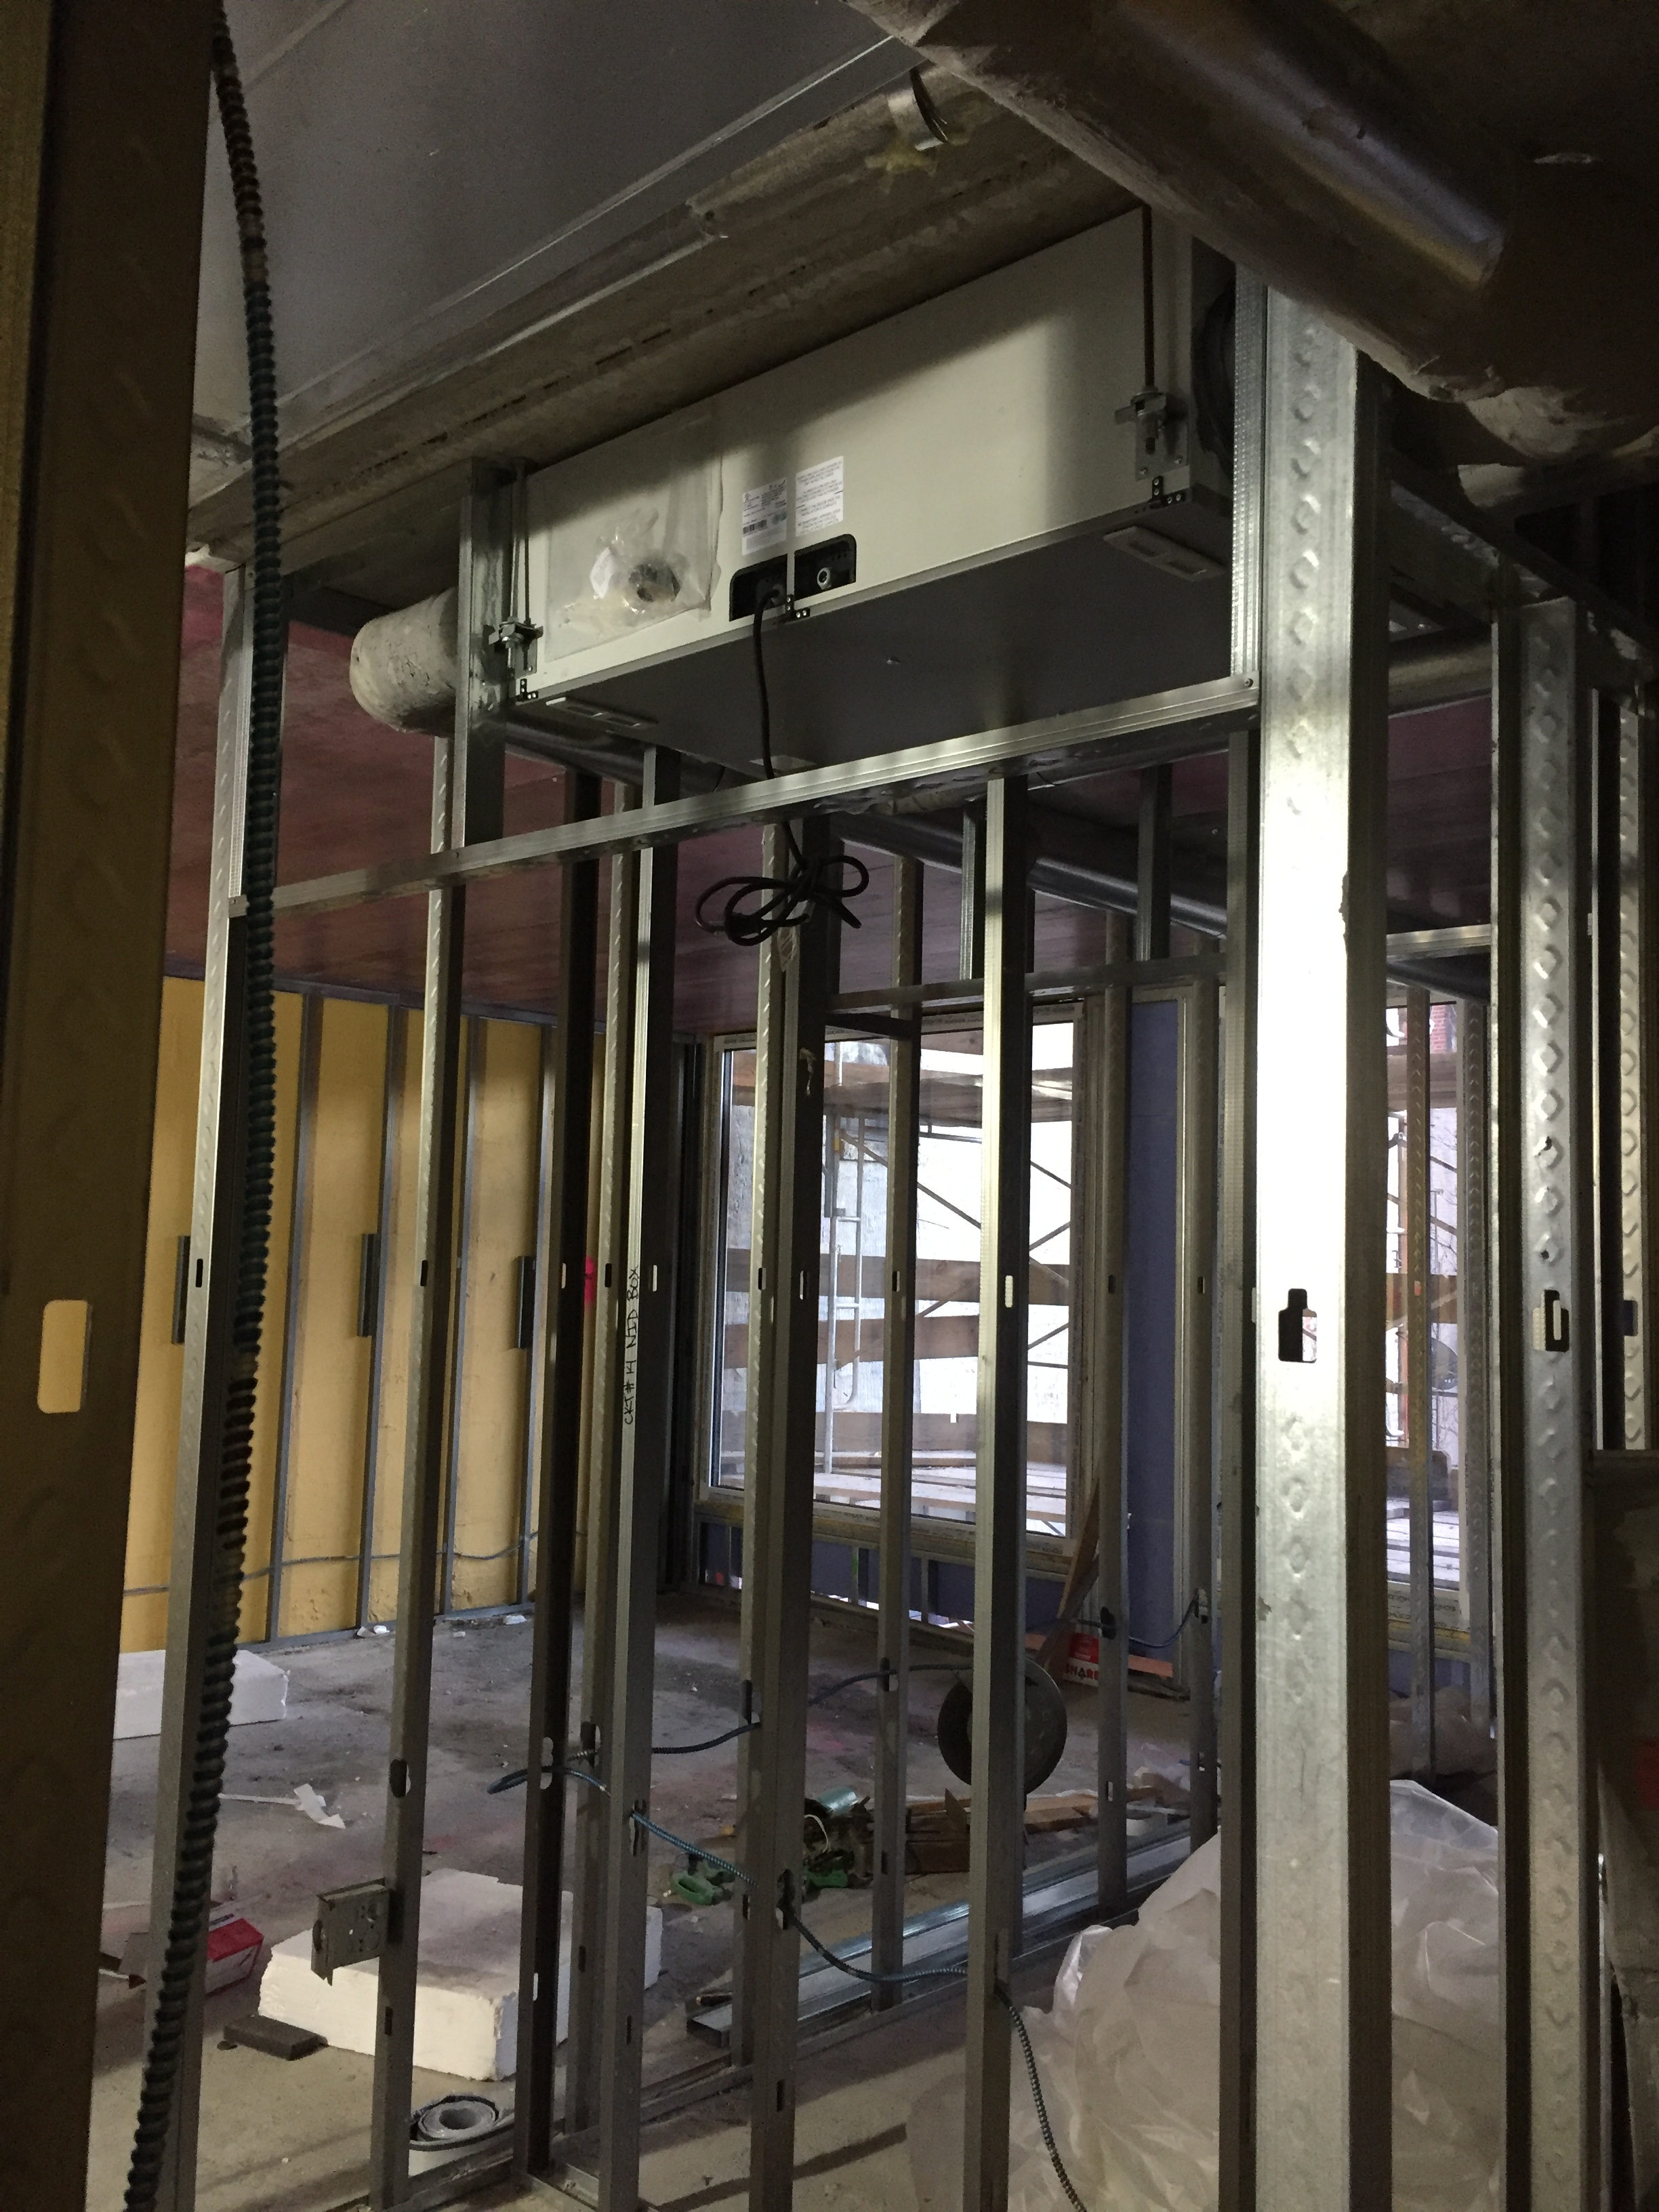 An ERV unit being installed at 542 West 153rd Street